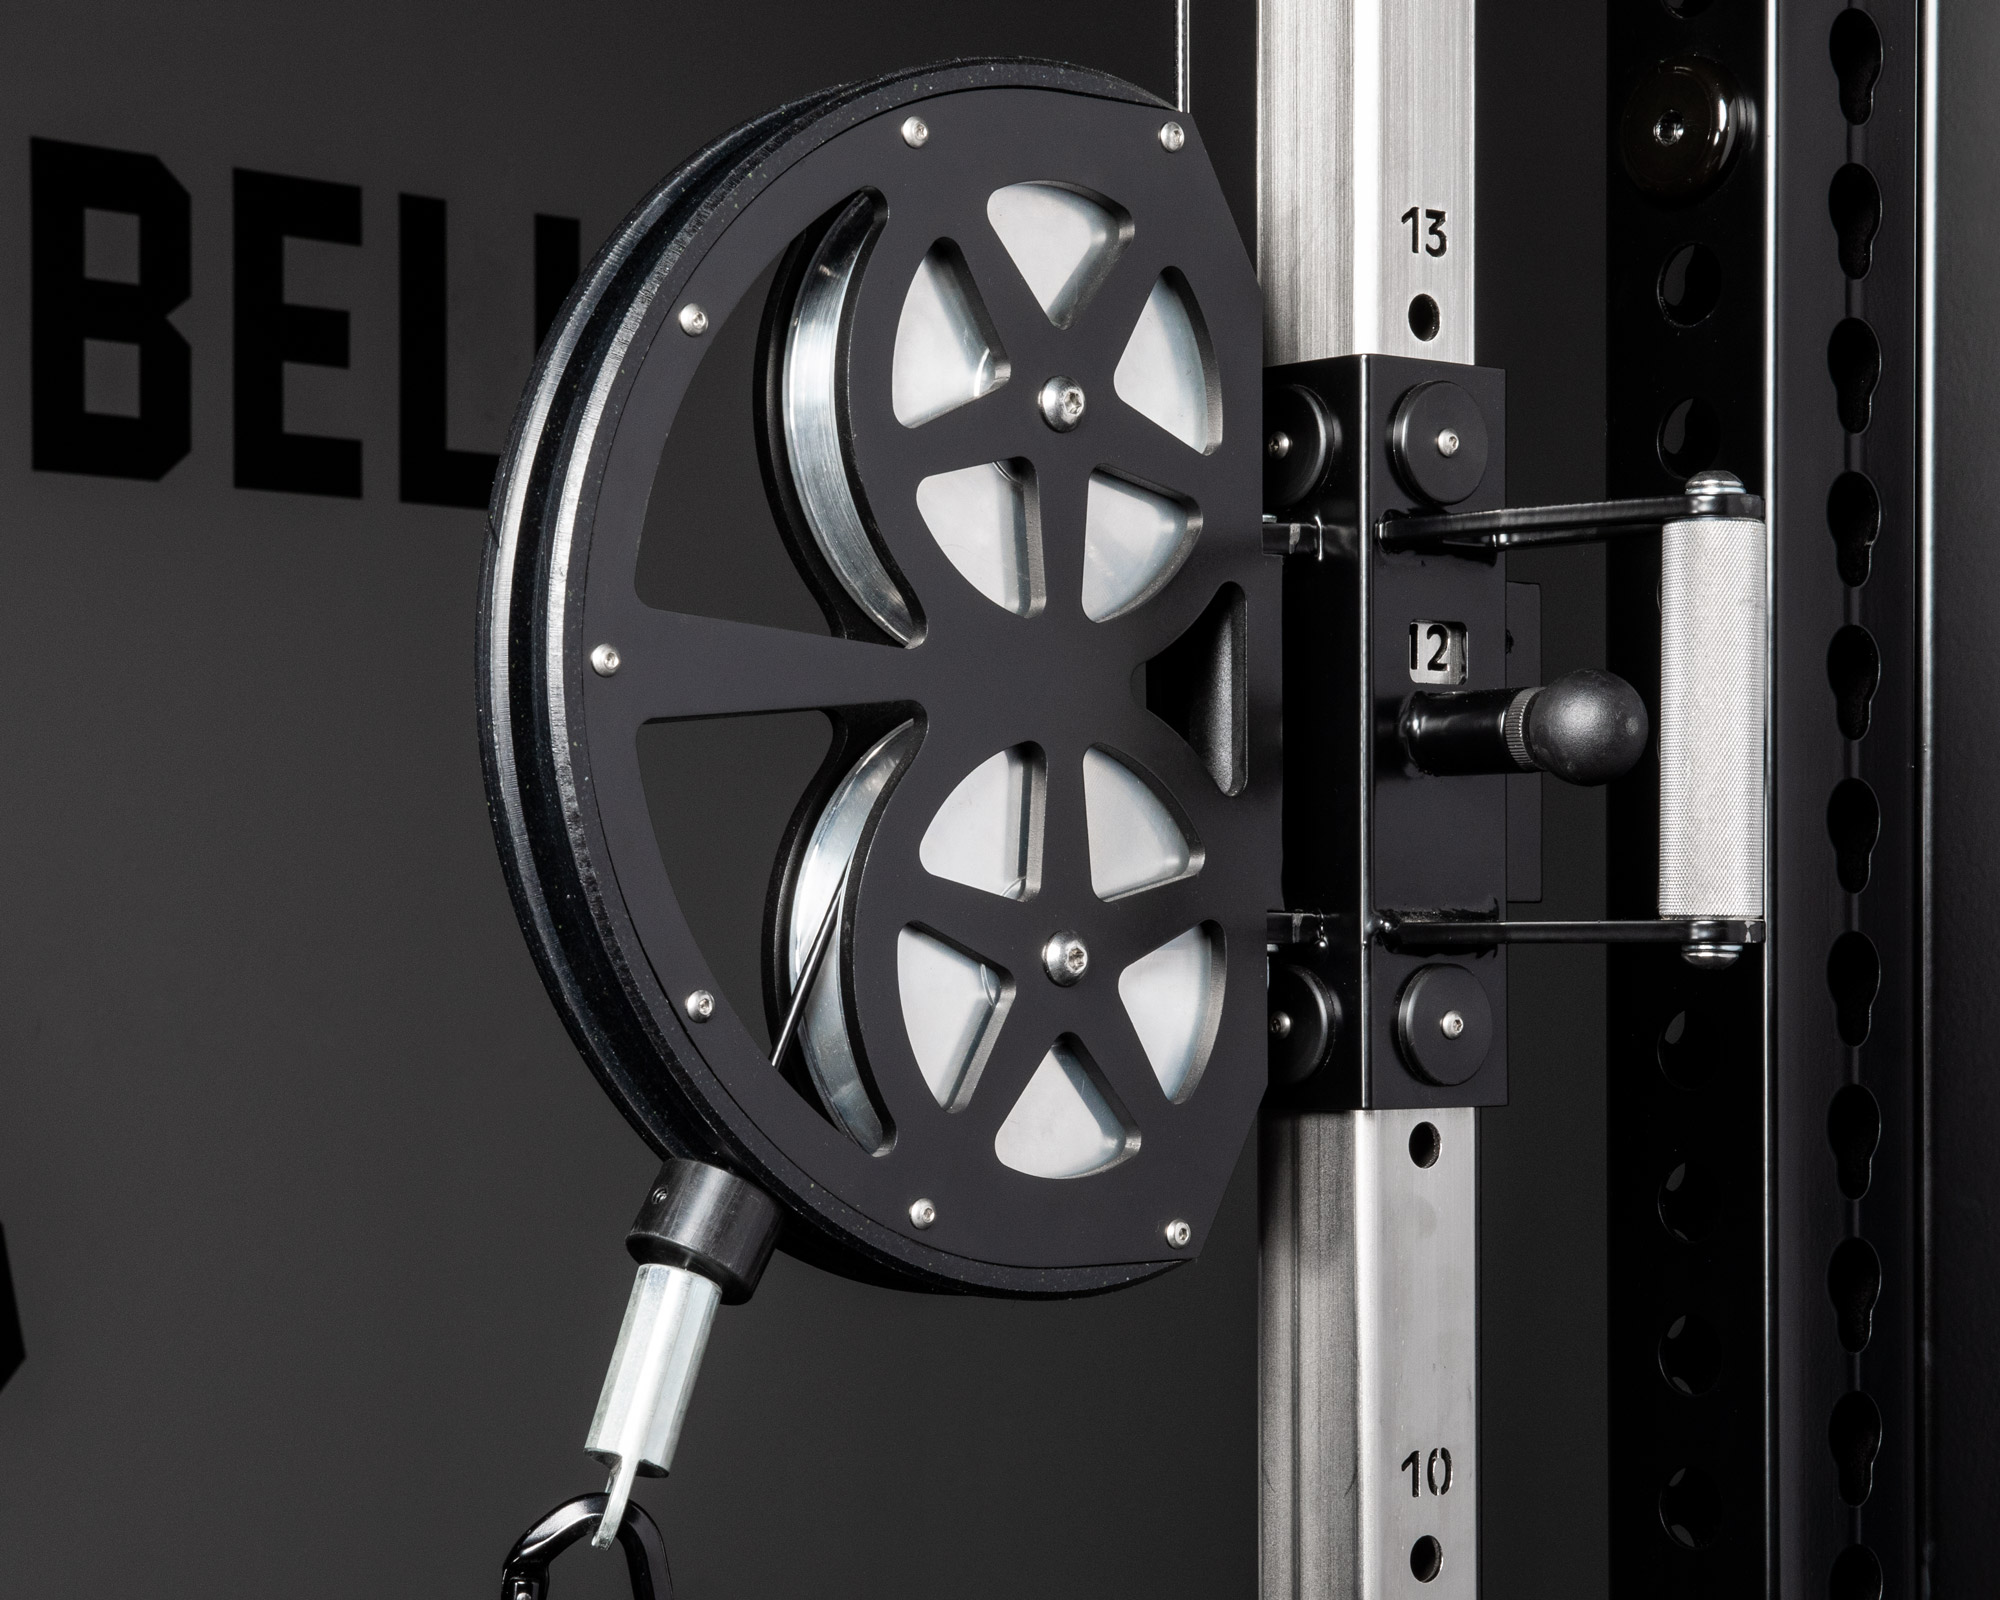 Rogue FT-1 Functional Trainer